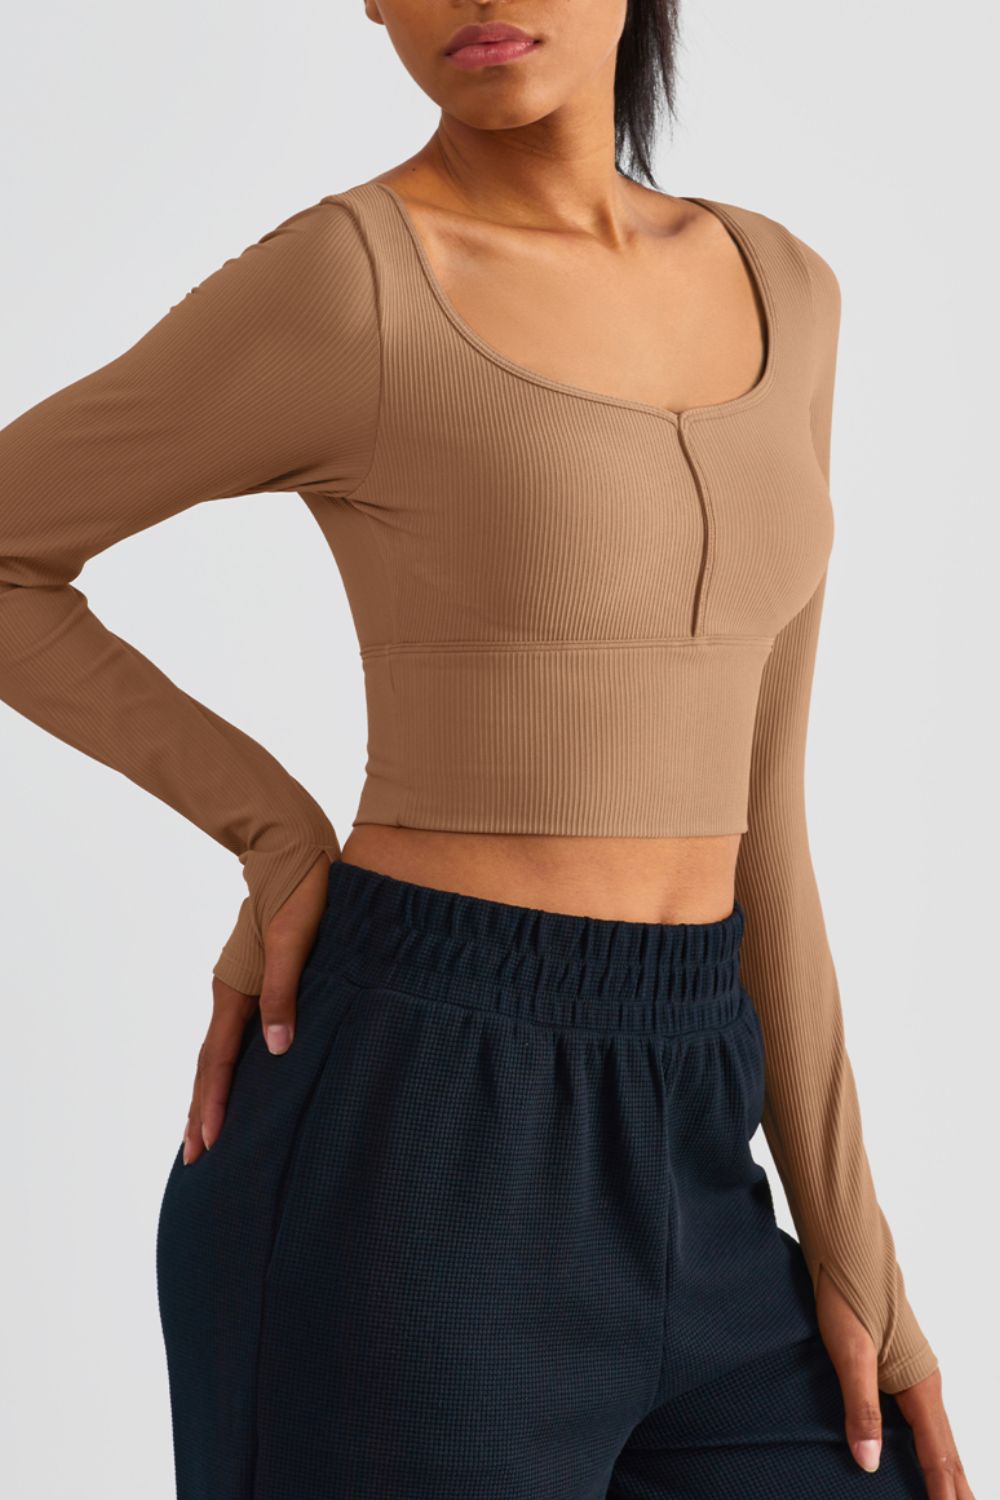 Women’s Scoop Neck Thumbhole Sleeve Cropped Sports Top